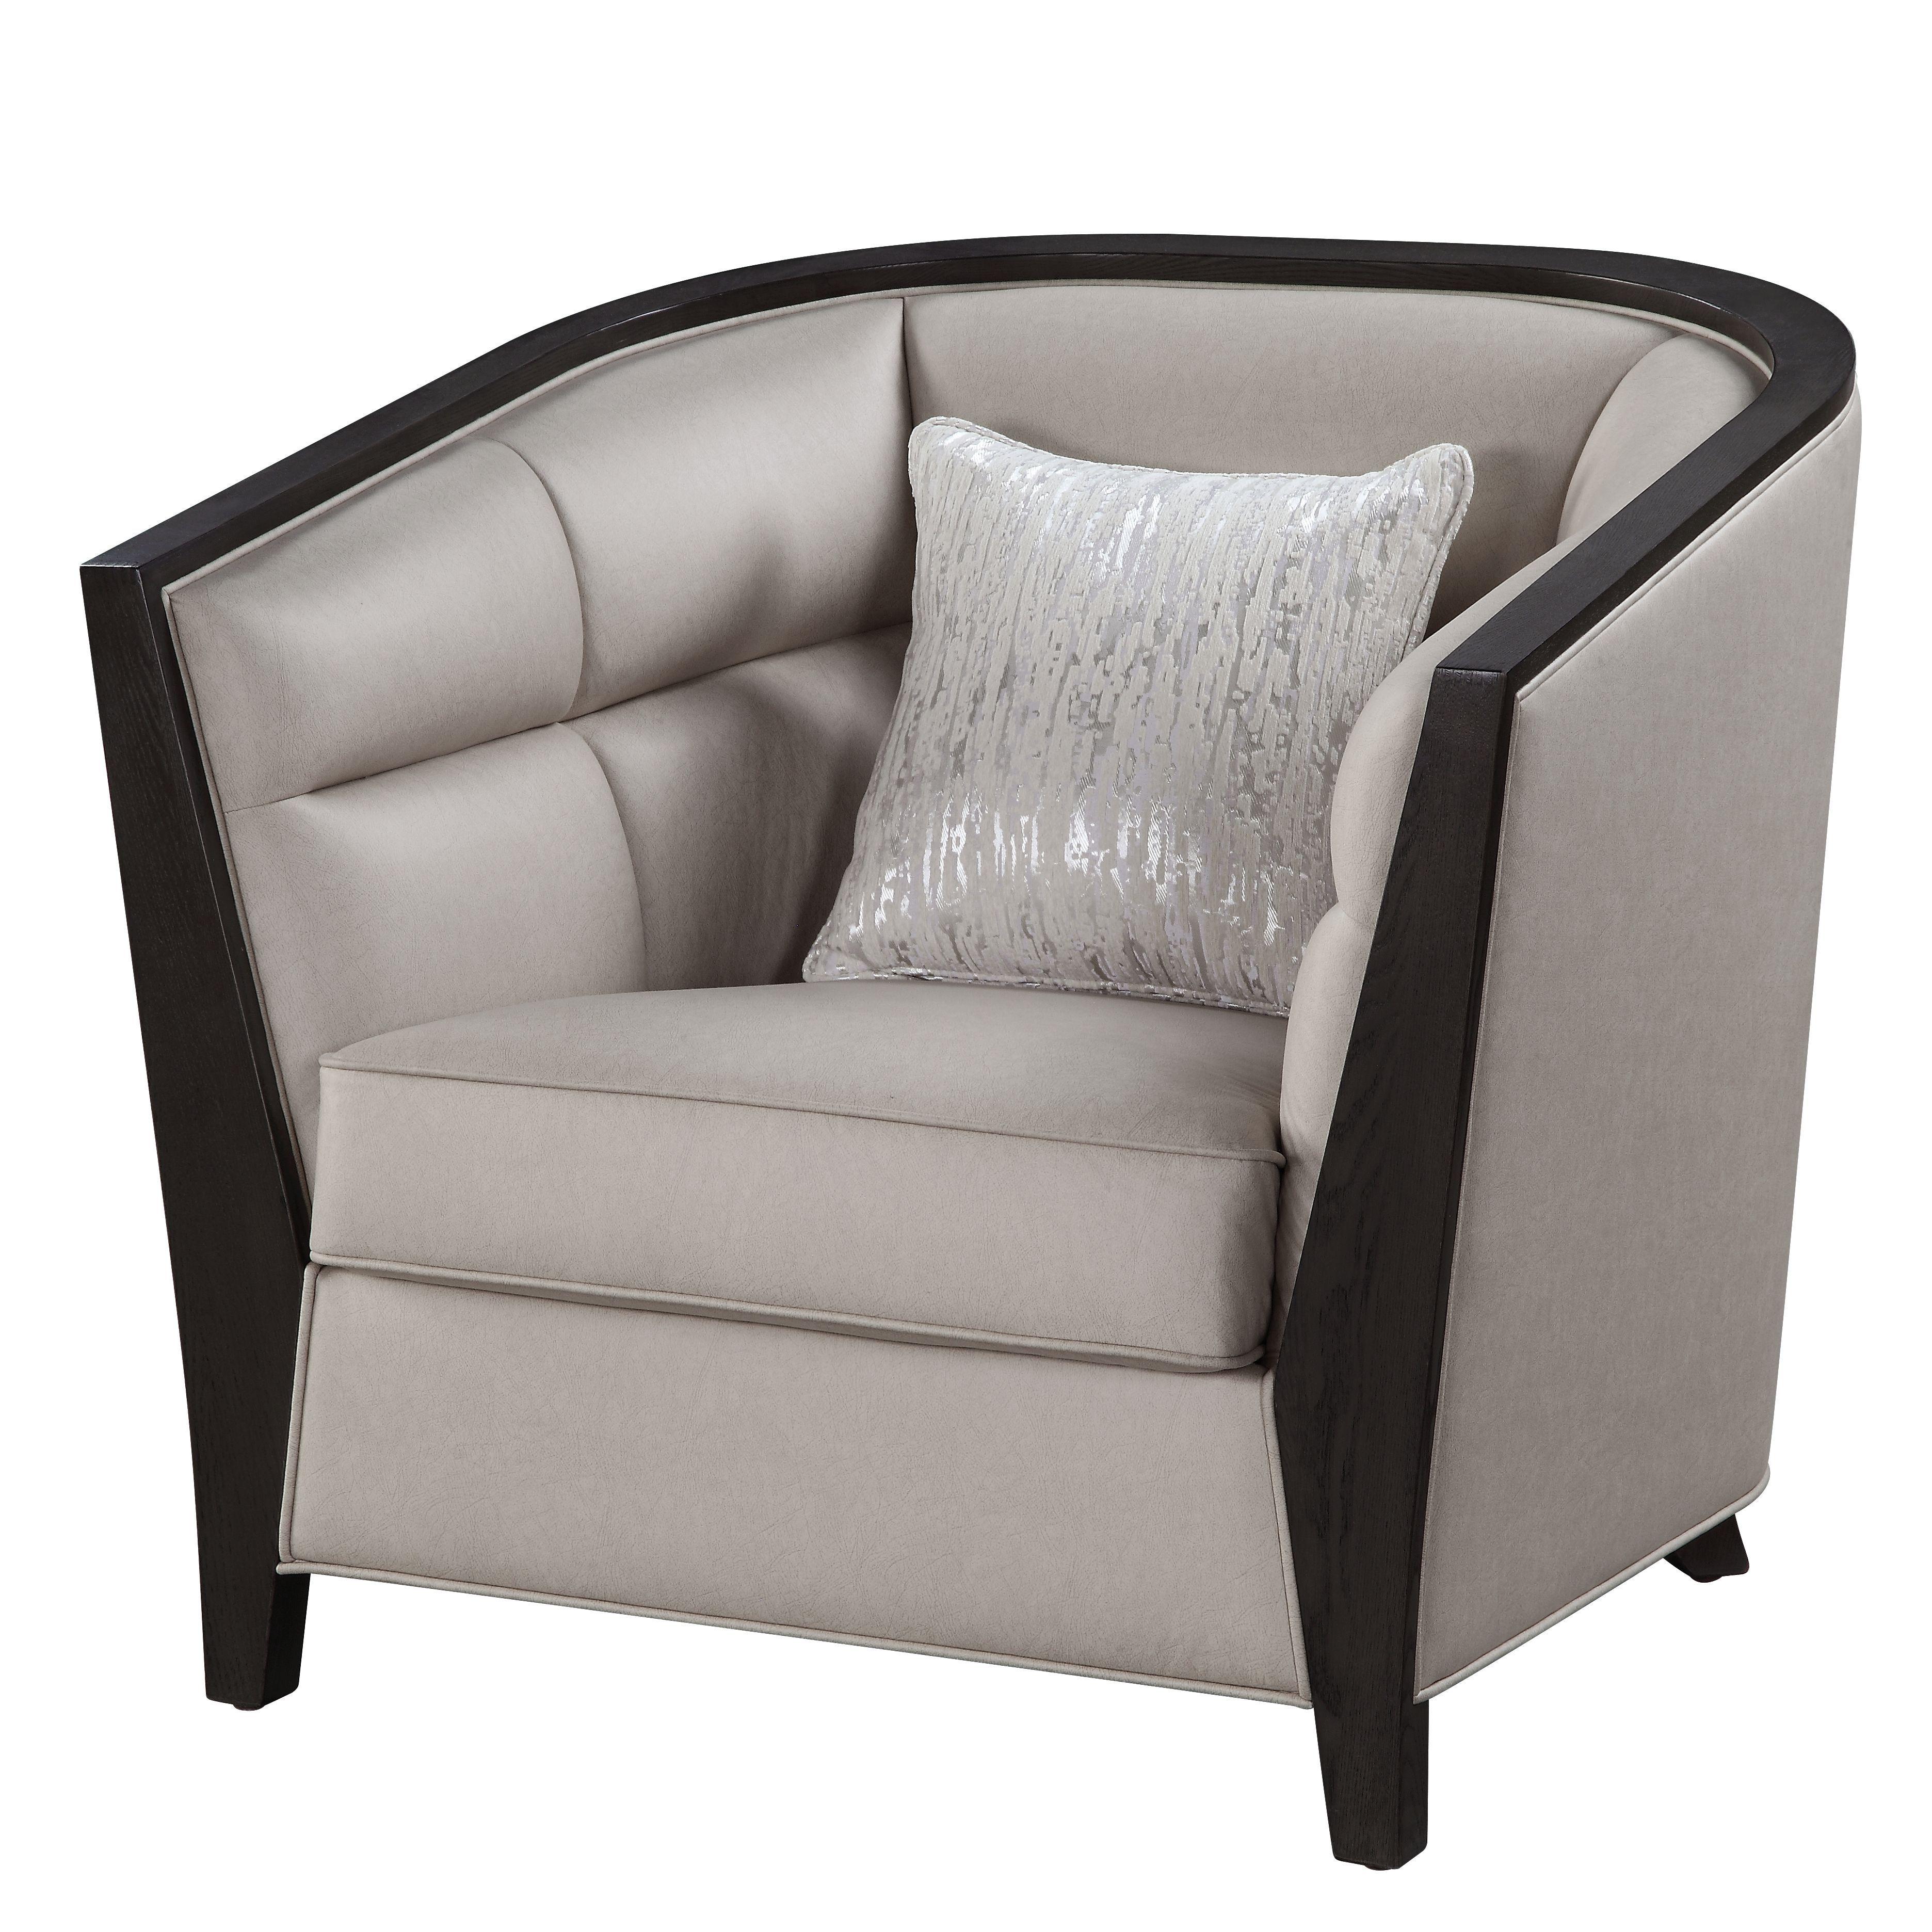 Contemporary, Classic Chair Zemocryss 54237 in Beige Fabric